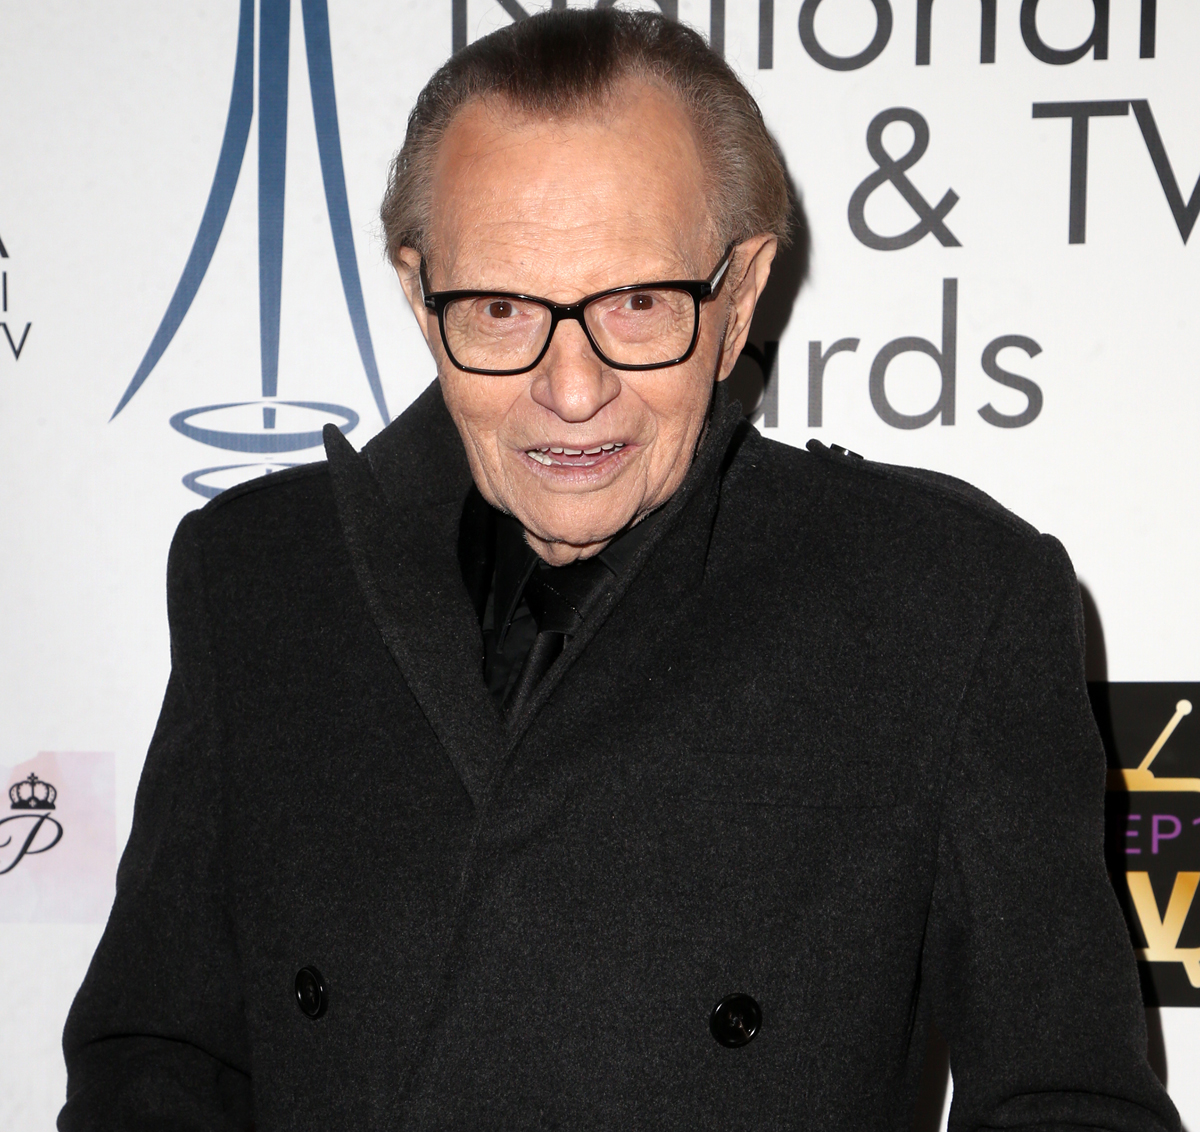 Larry King mourns the death of his son and daughter